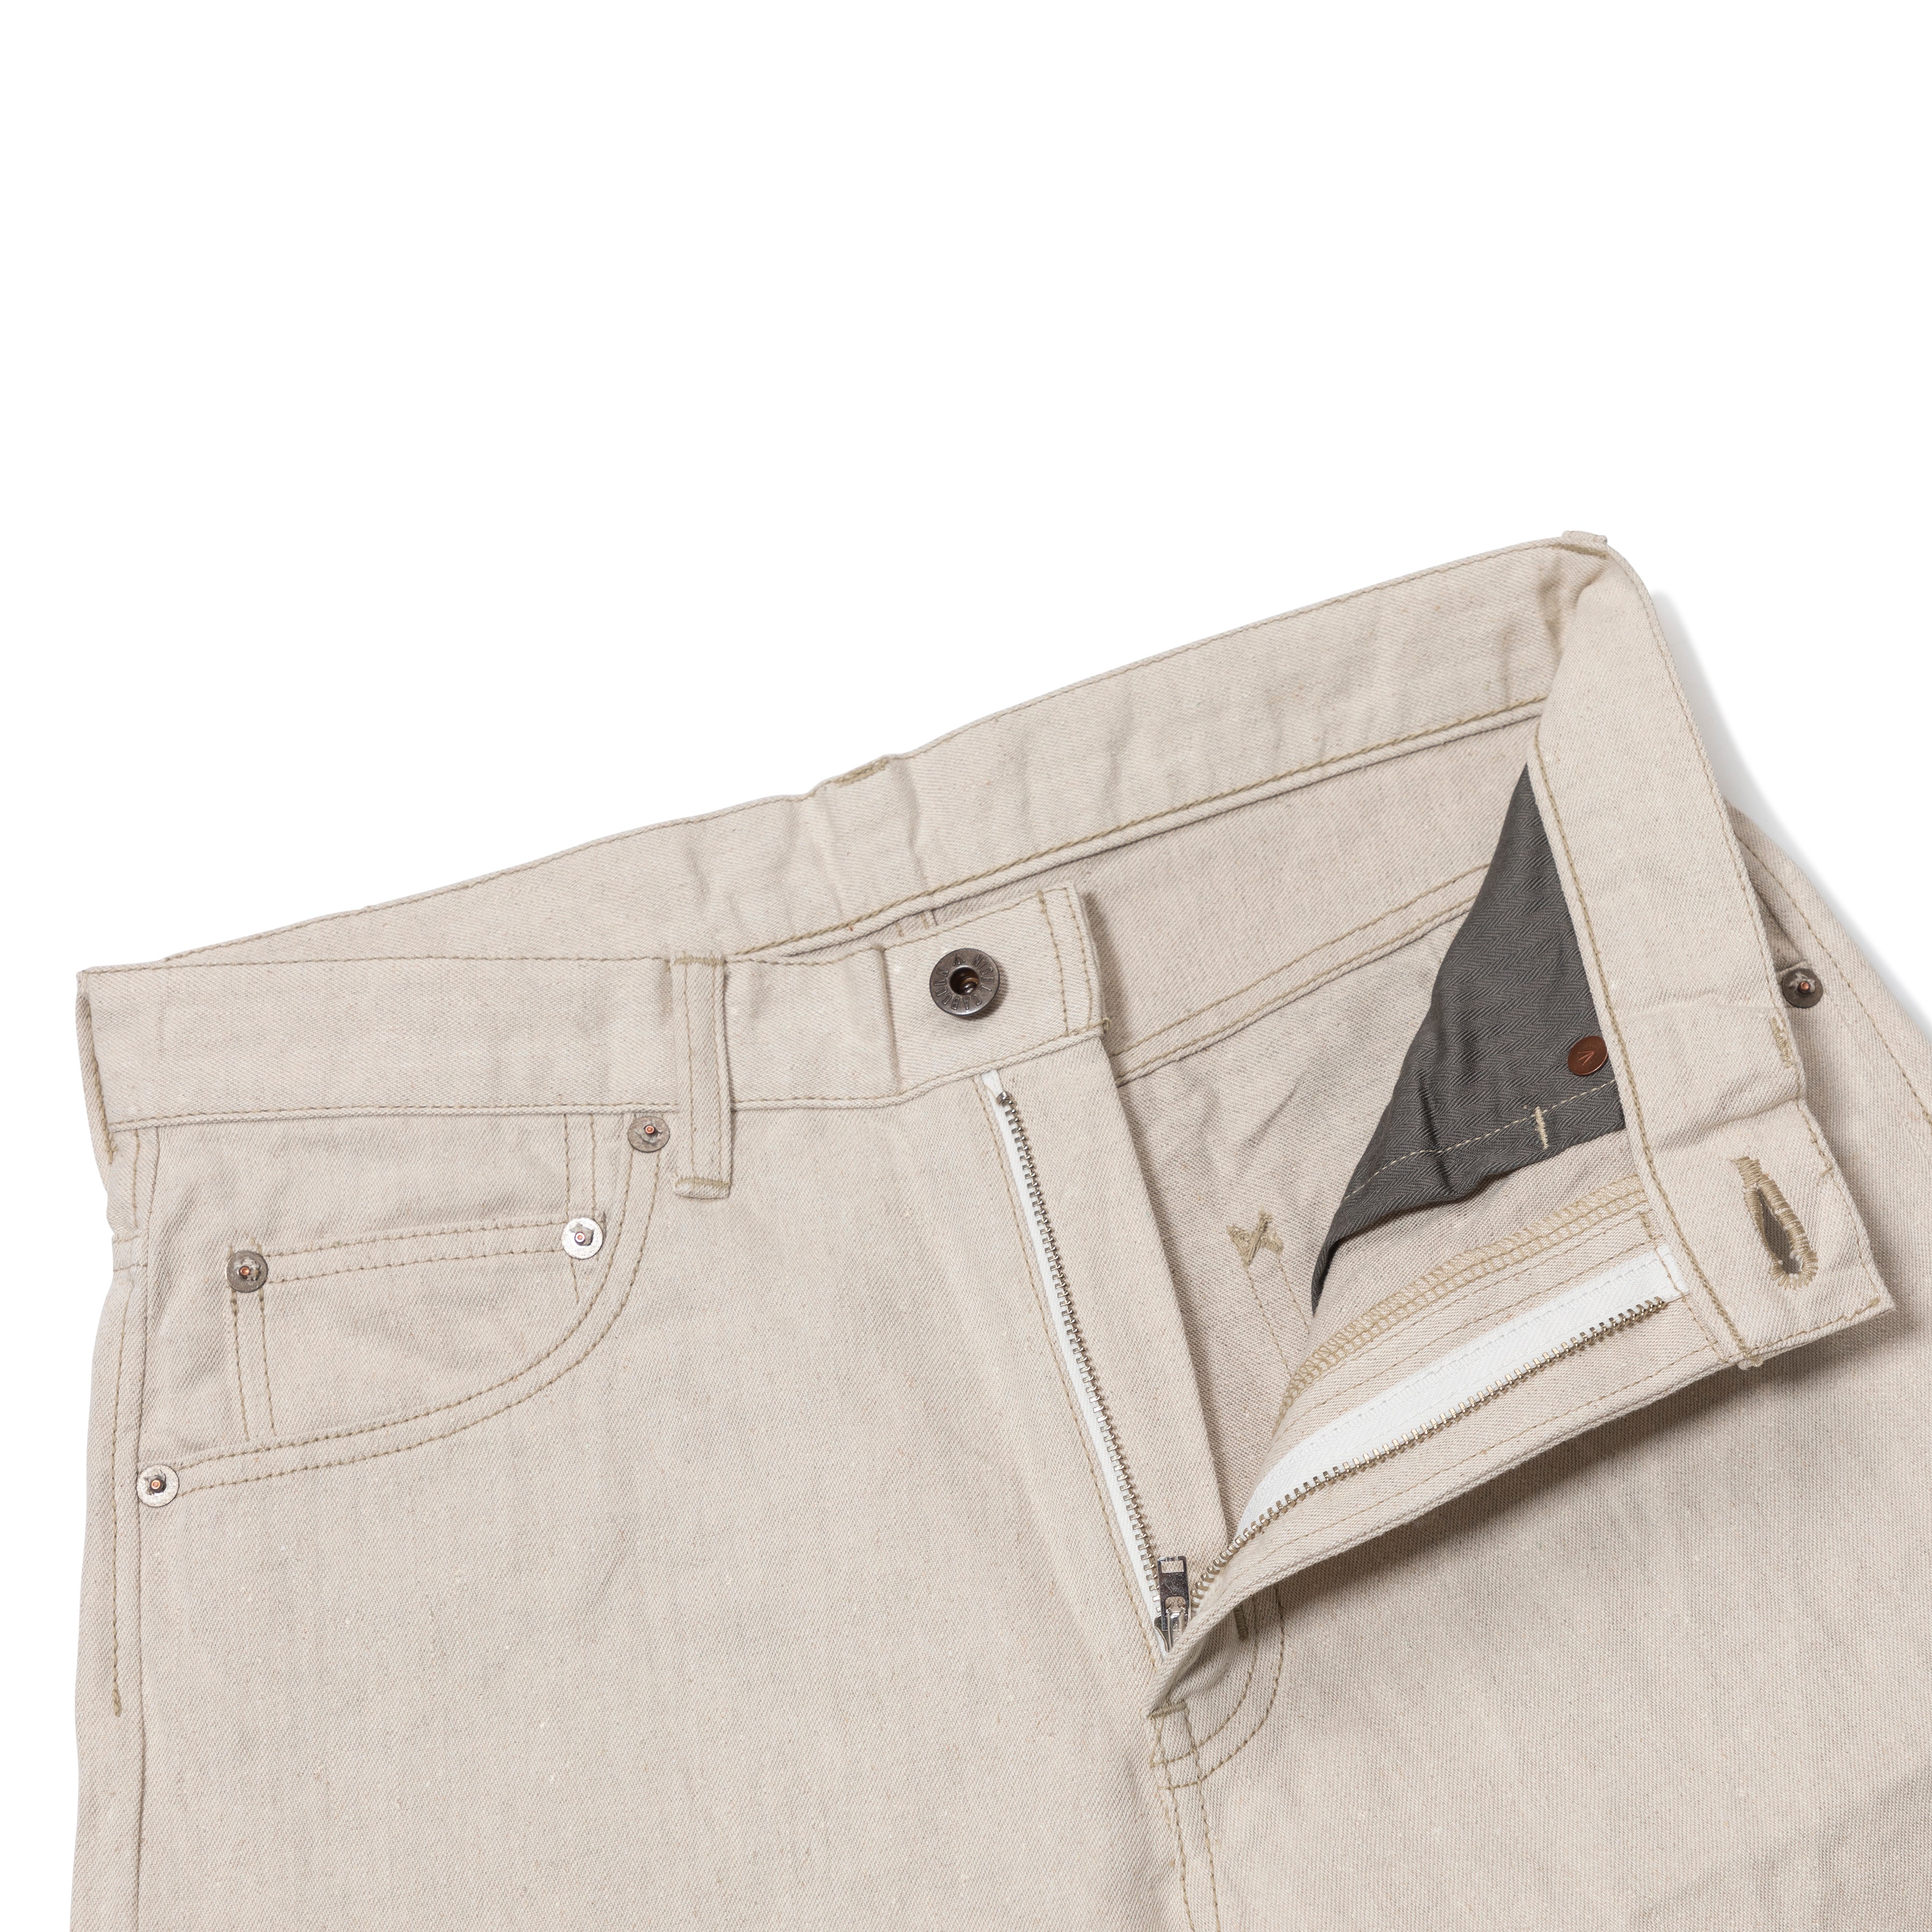 Cotton/Linen 5 Pocket Jeans - The Armoury